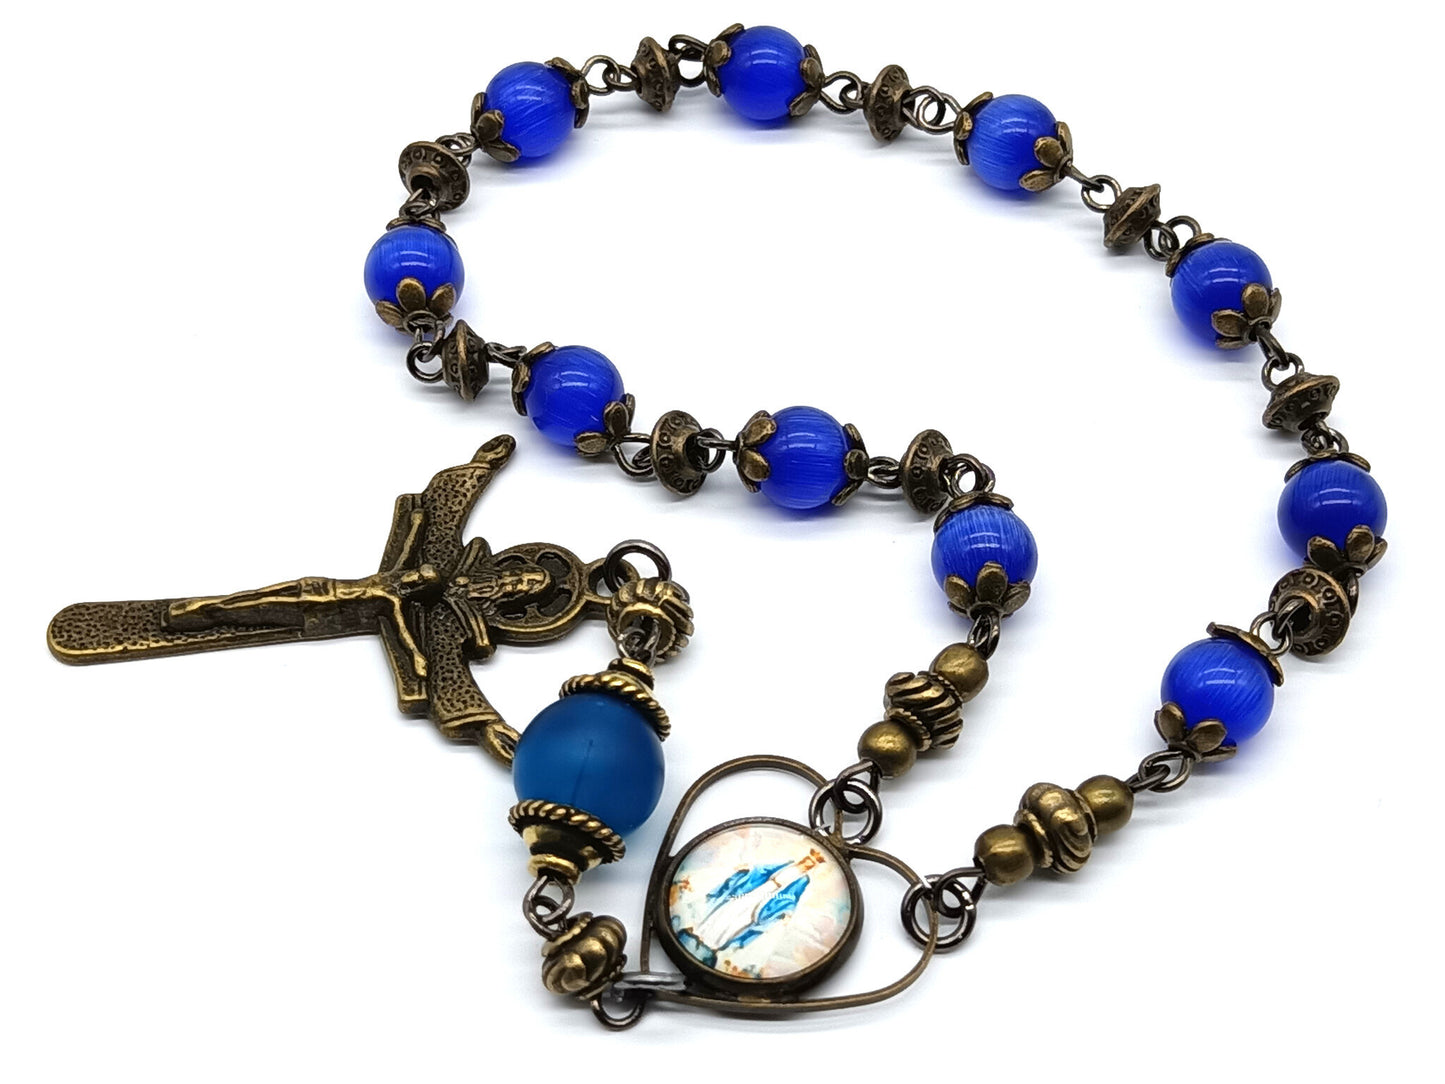 Our Lady of Grace unique rosary beads single decade with blue glass beads and bronze Trinity crucifix, picture medal and small beads.